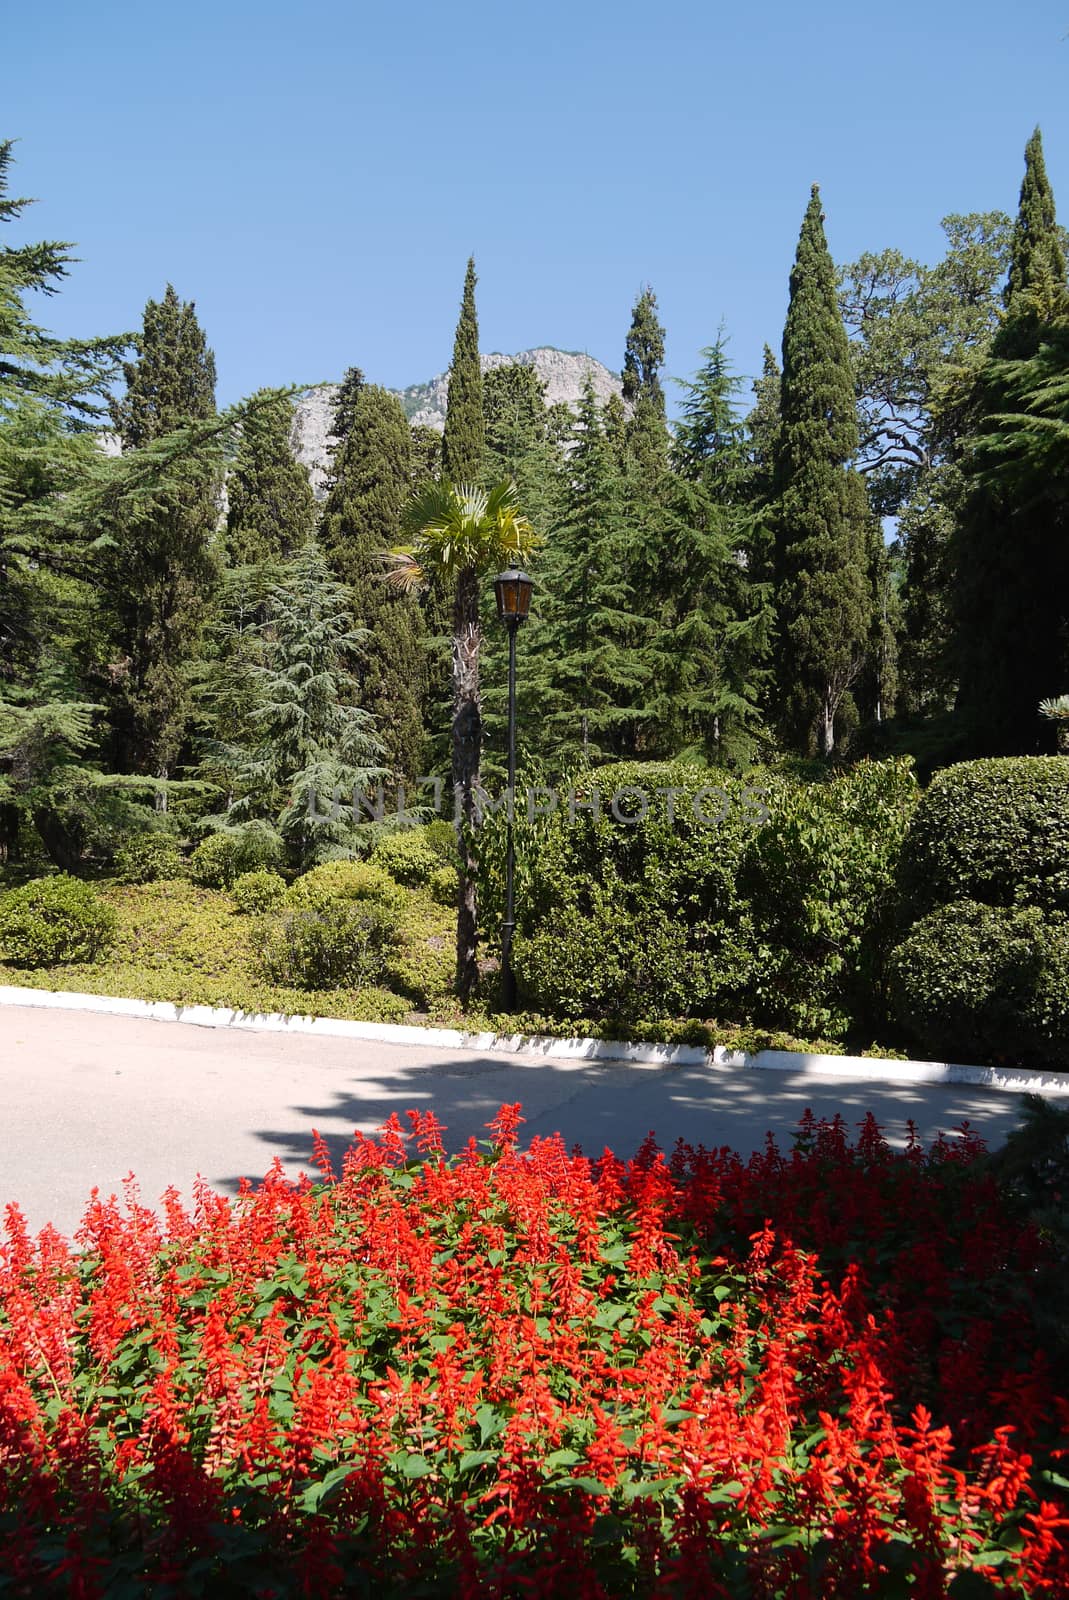 Flowerbed with red flowers and other green spaces in the park area on the background of the big mountain by Adamchuk